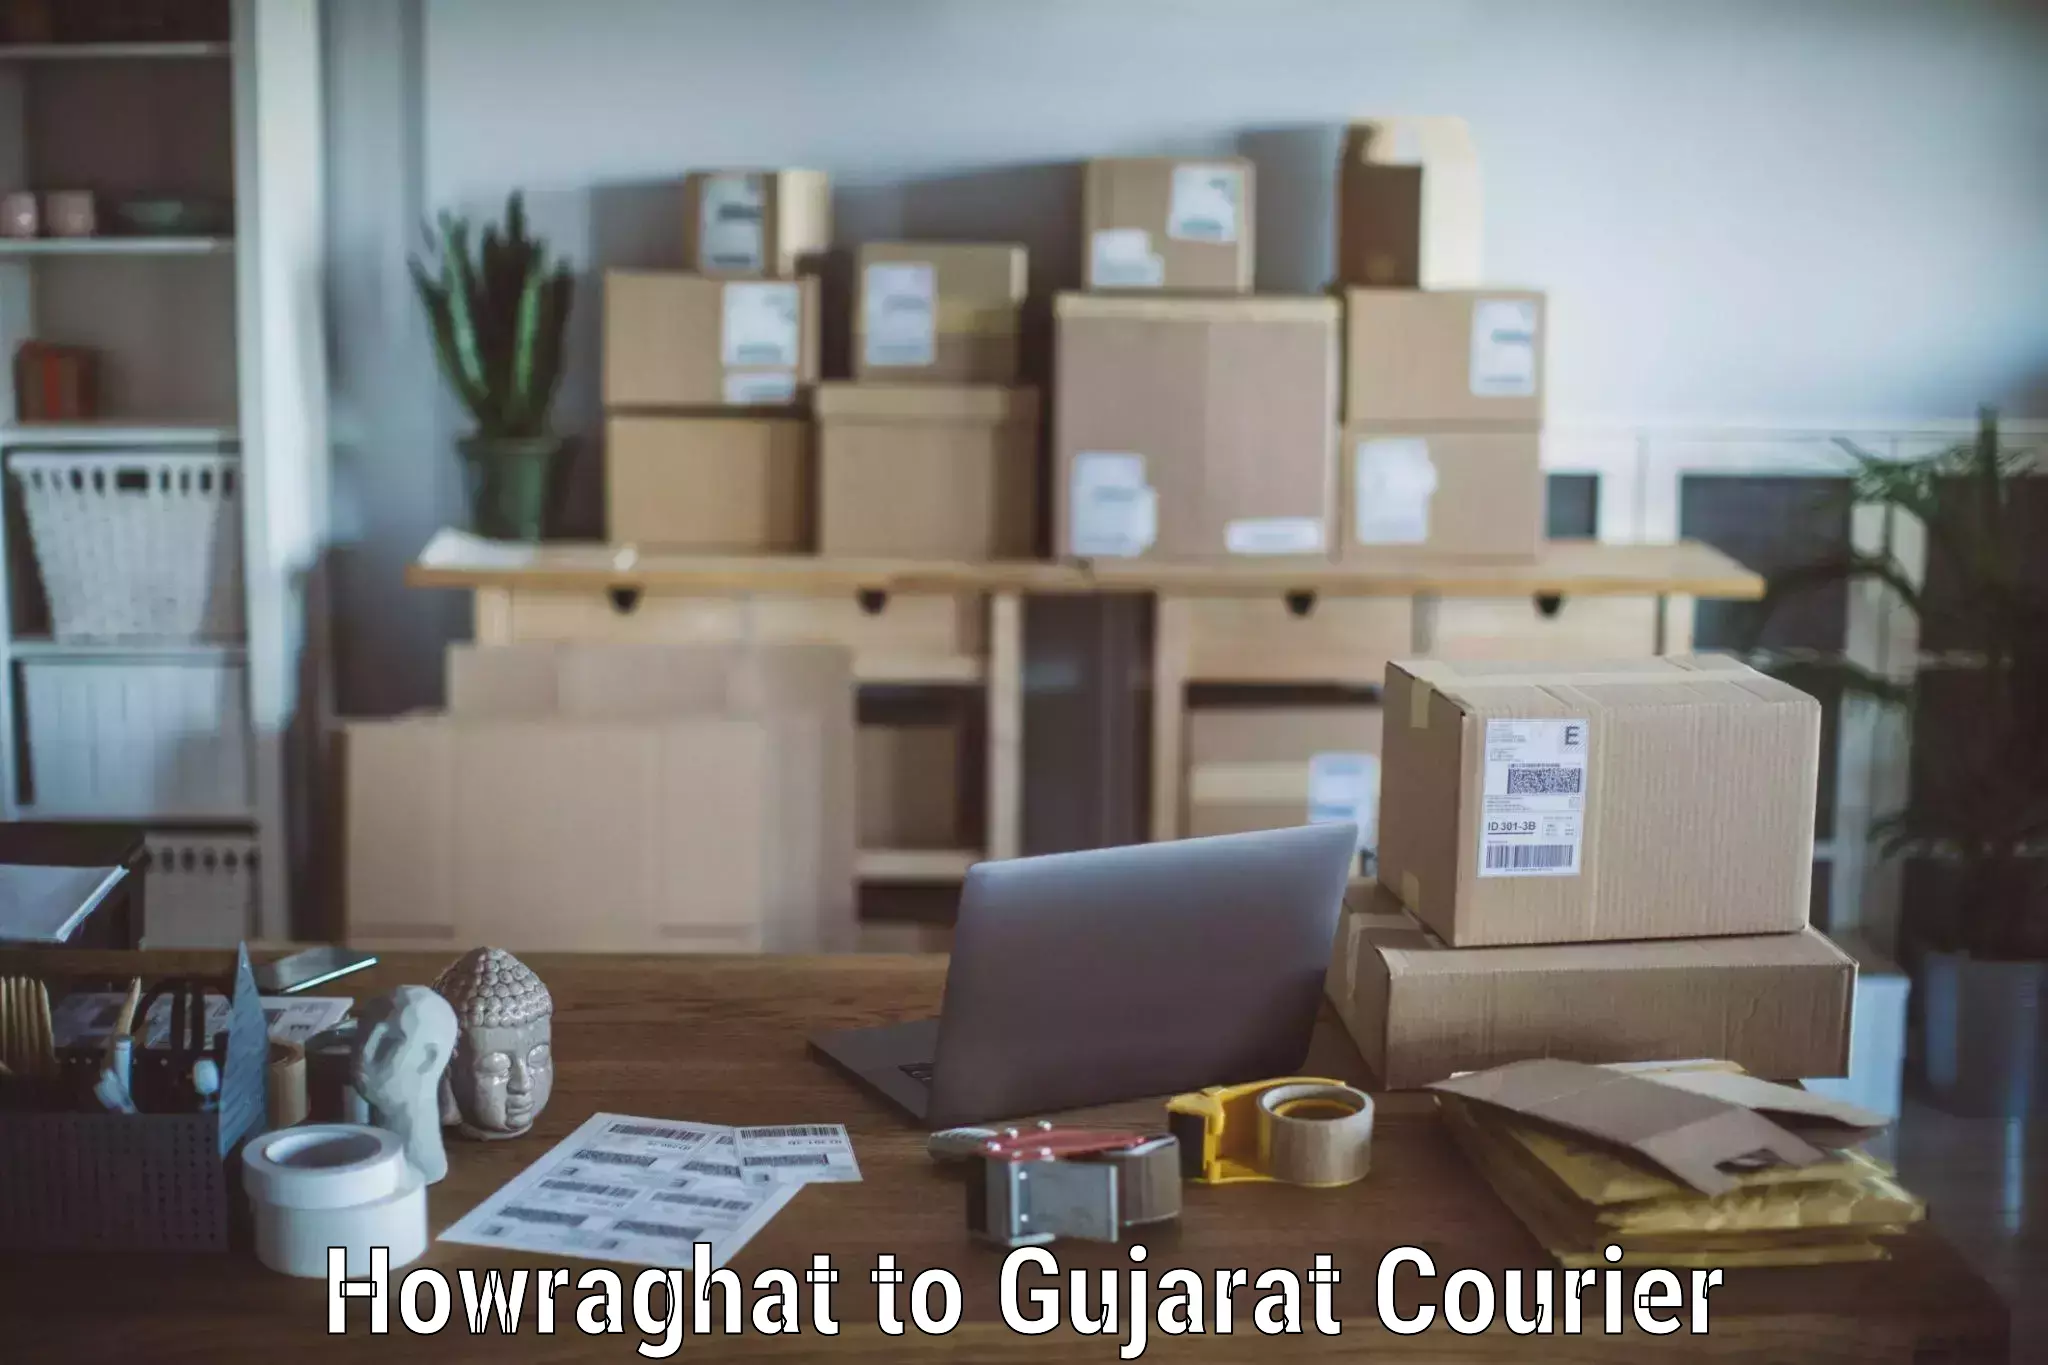 Professional moving company Howraghat to Surat